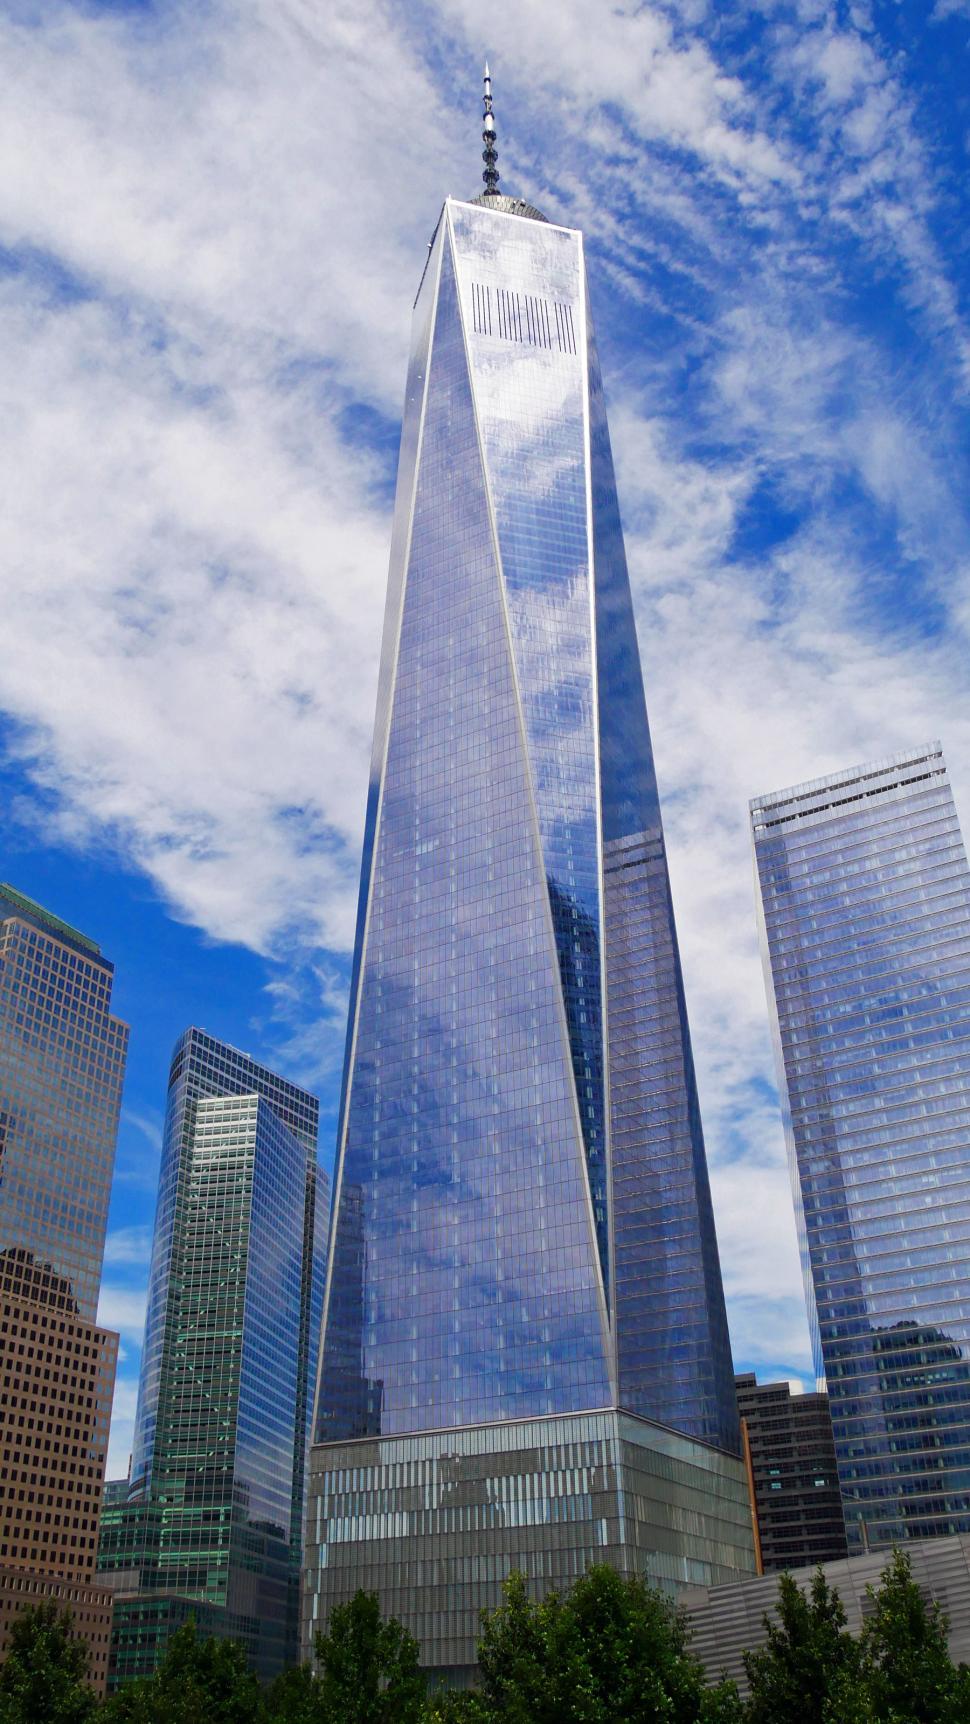 Free Image of One World Trade Center 